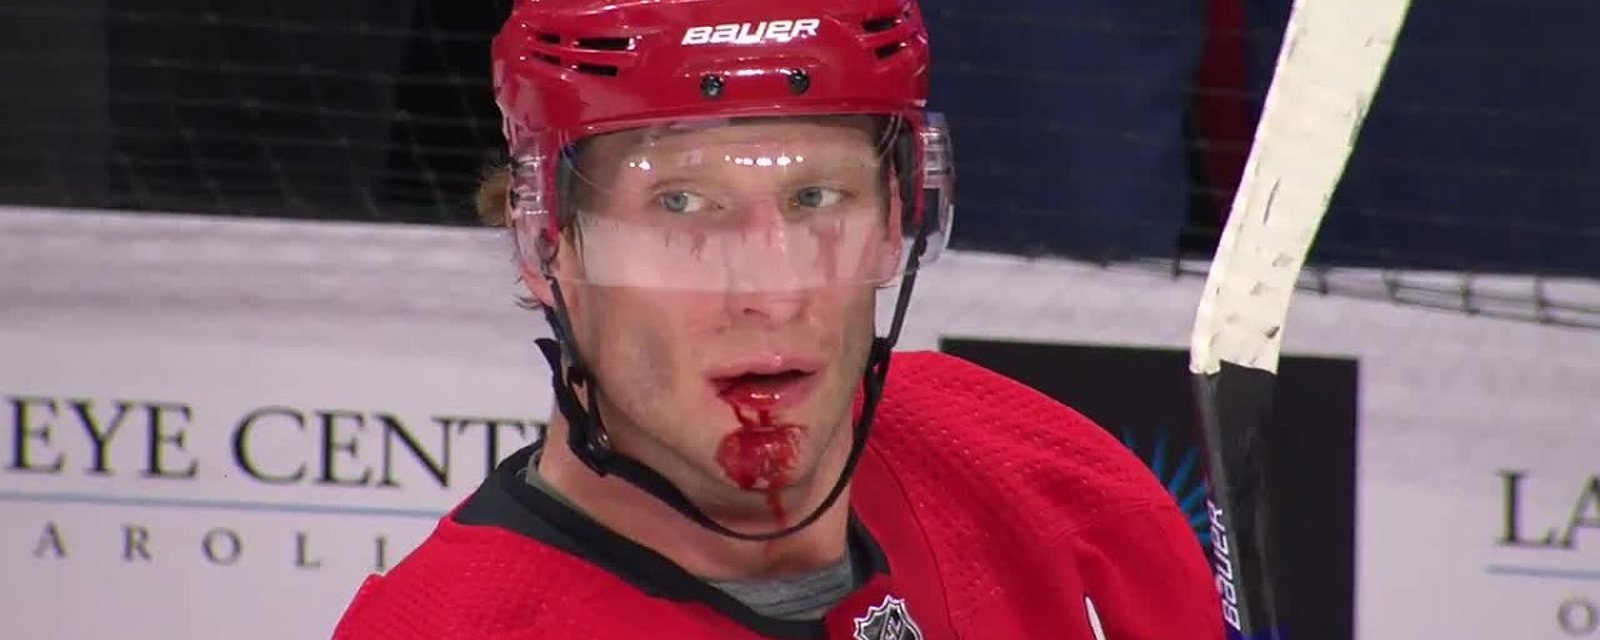 Jordan Staal busted open but goes unnoticed by NHL officials.